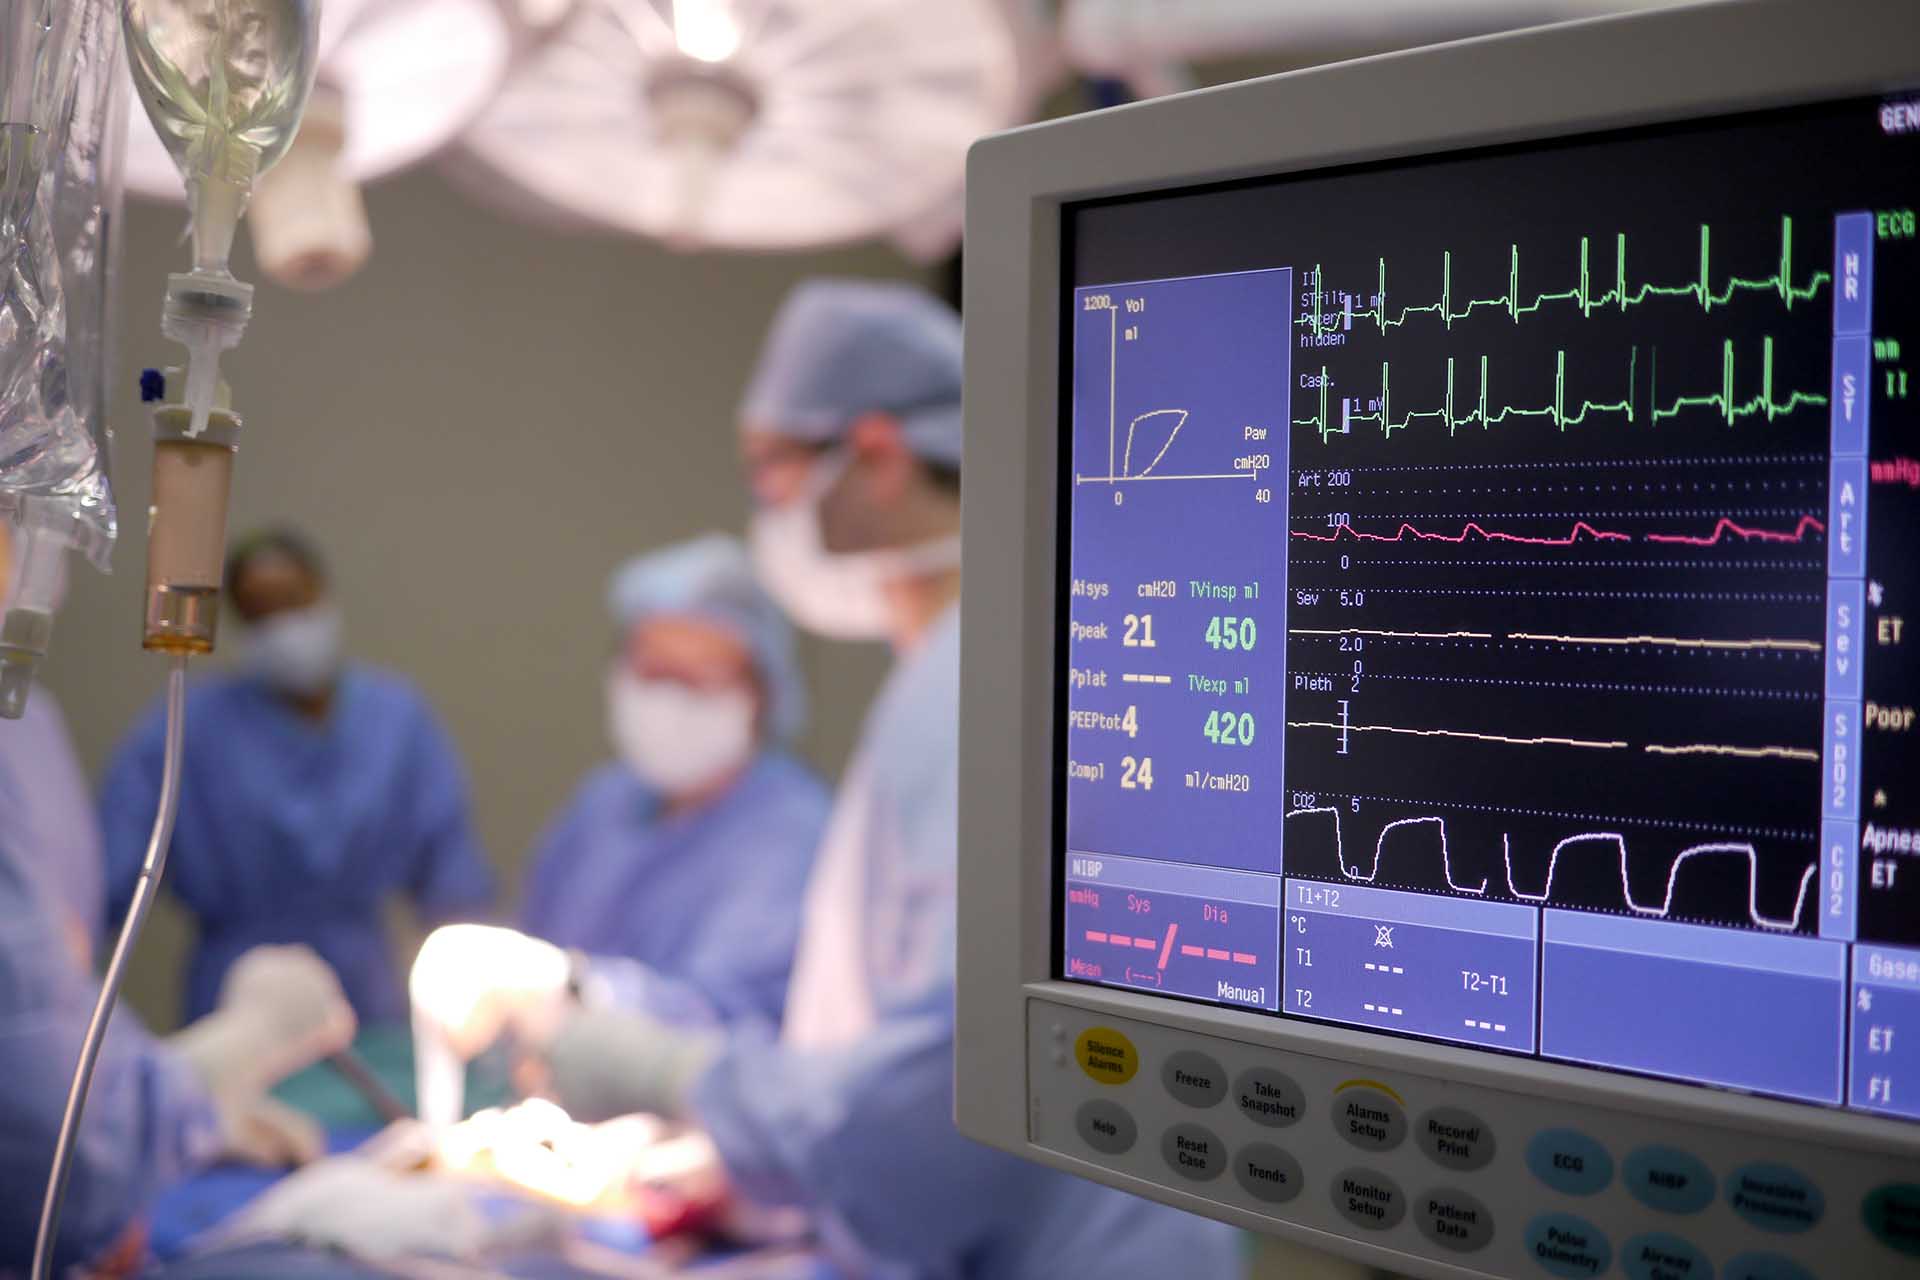 Heart monitor in surgery